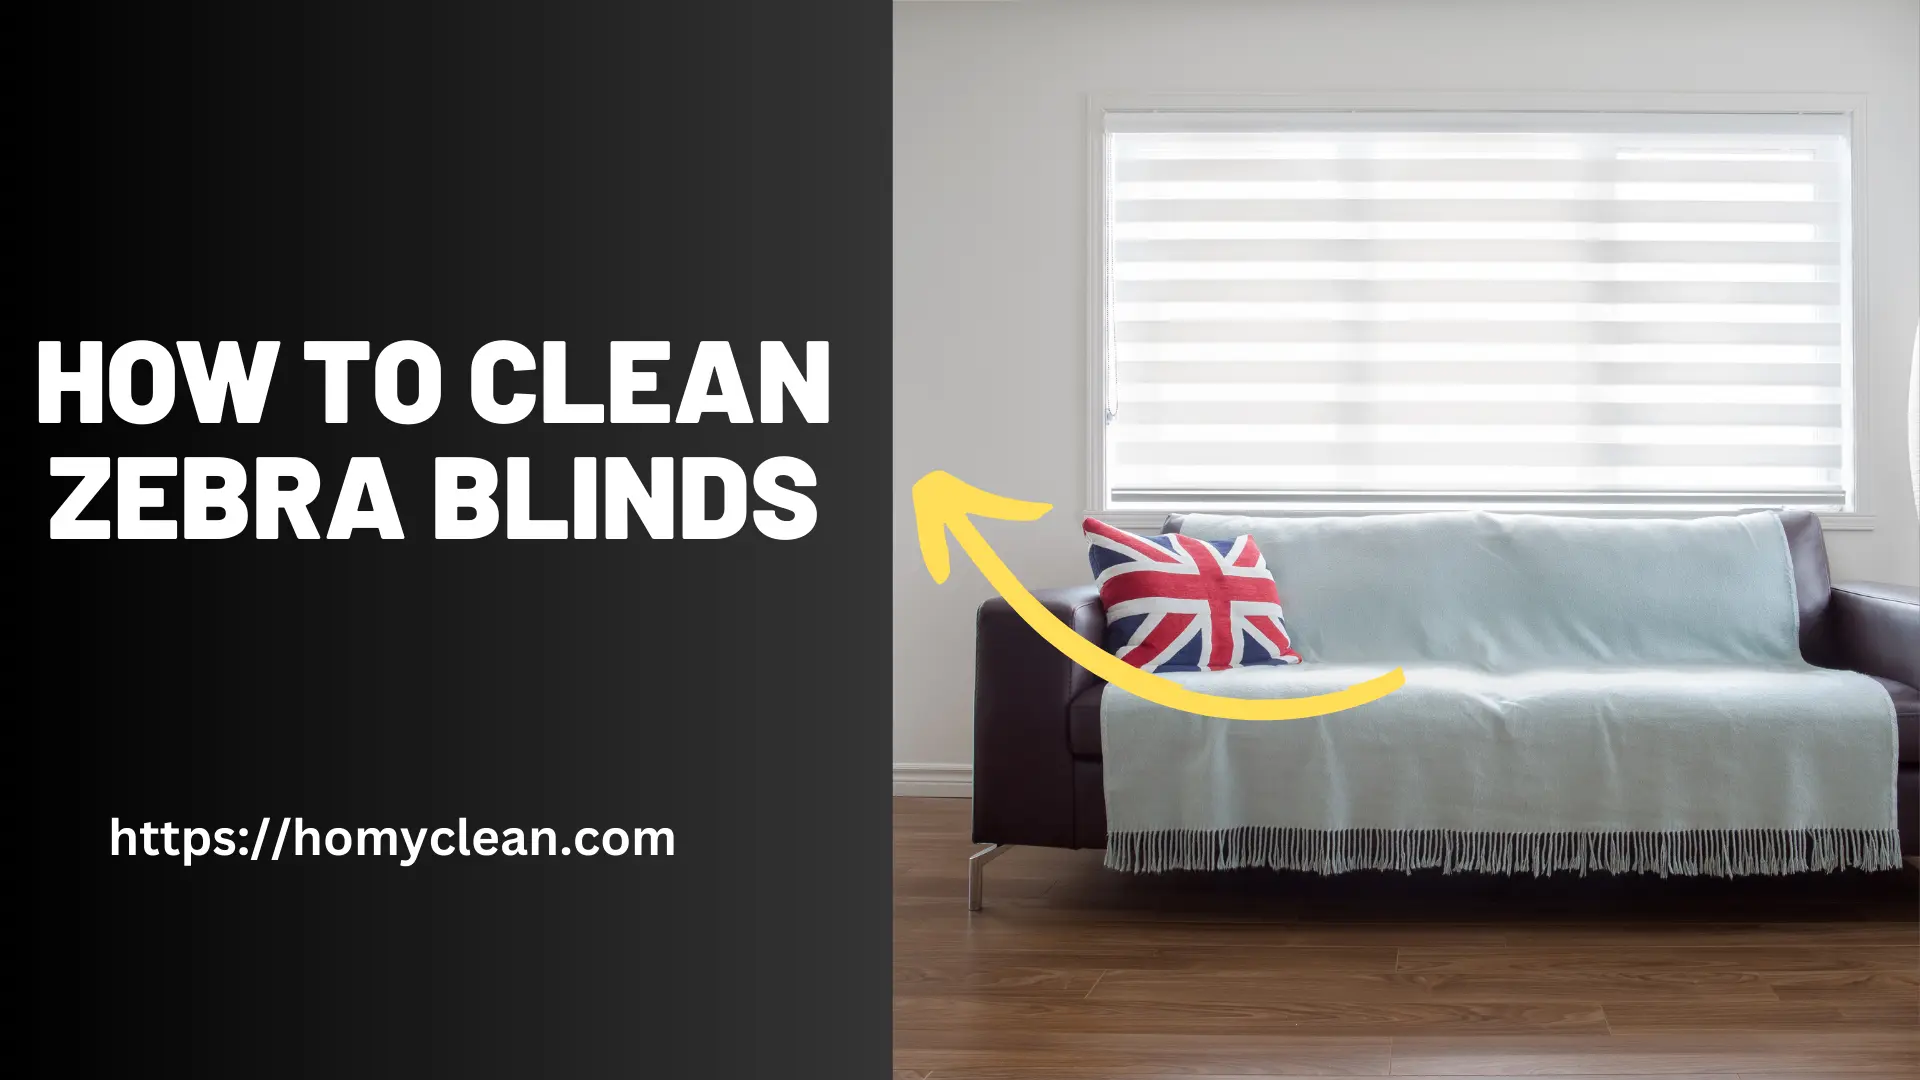 How to Clean Zebra Blinds and Get Your Zebra Blinds Looking Fresh – Need Help To clean Zebra Blinds?